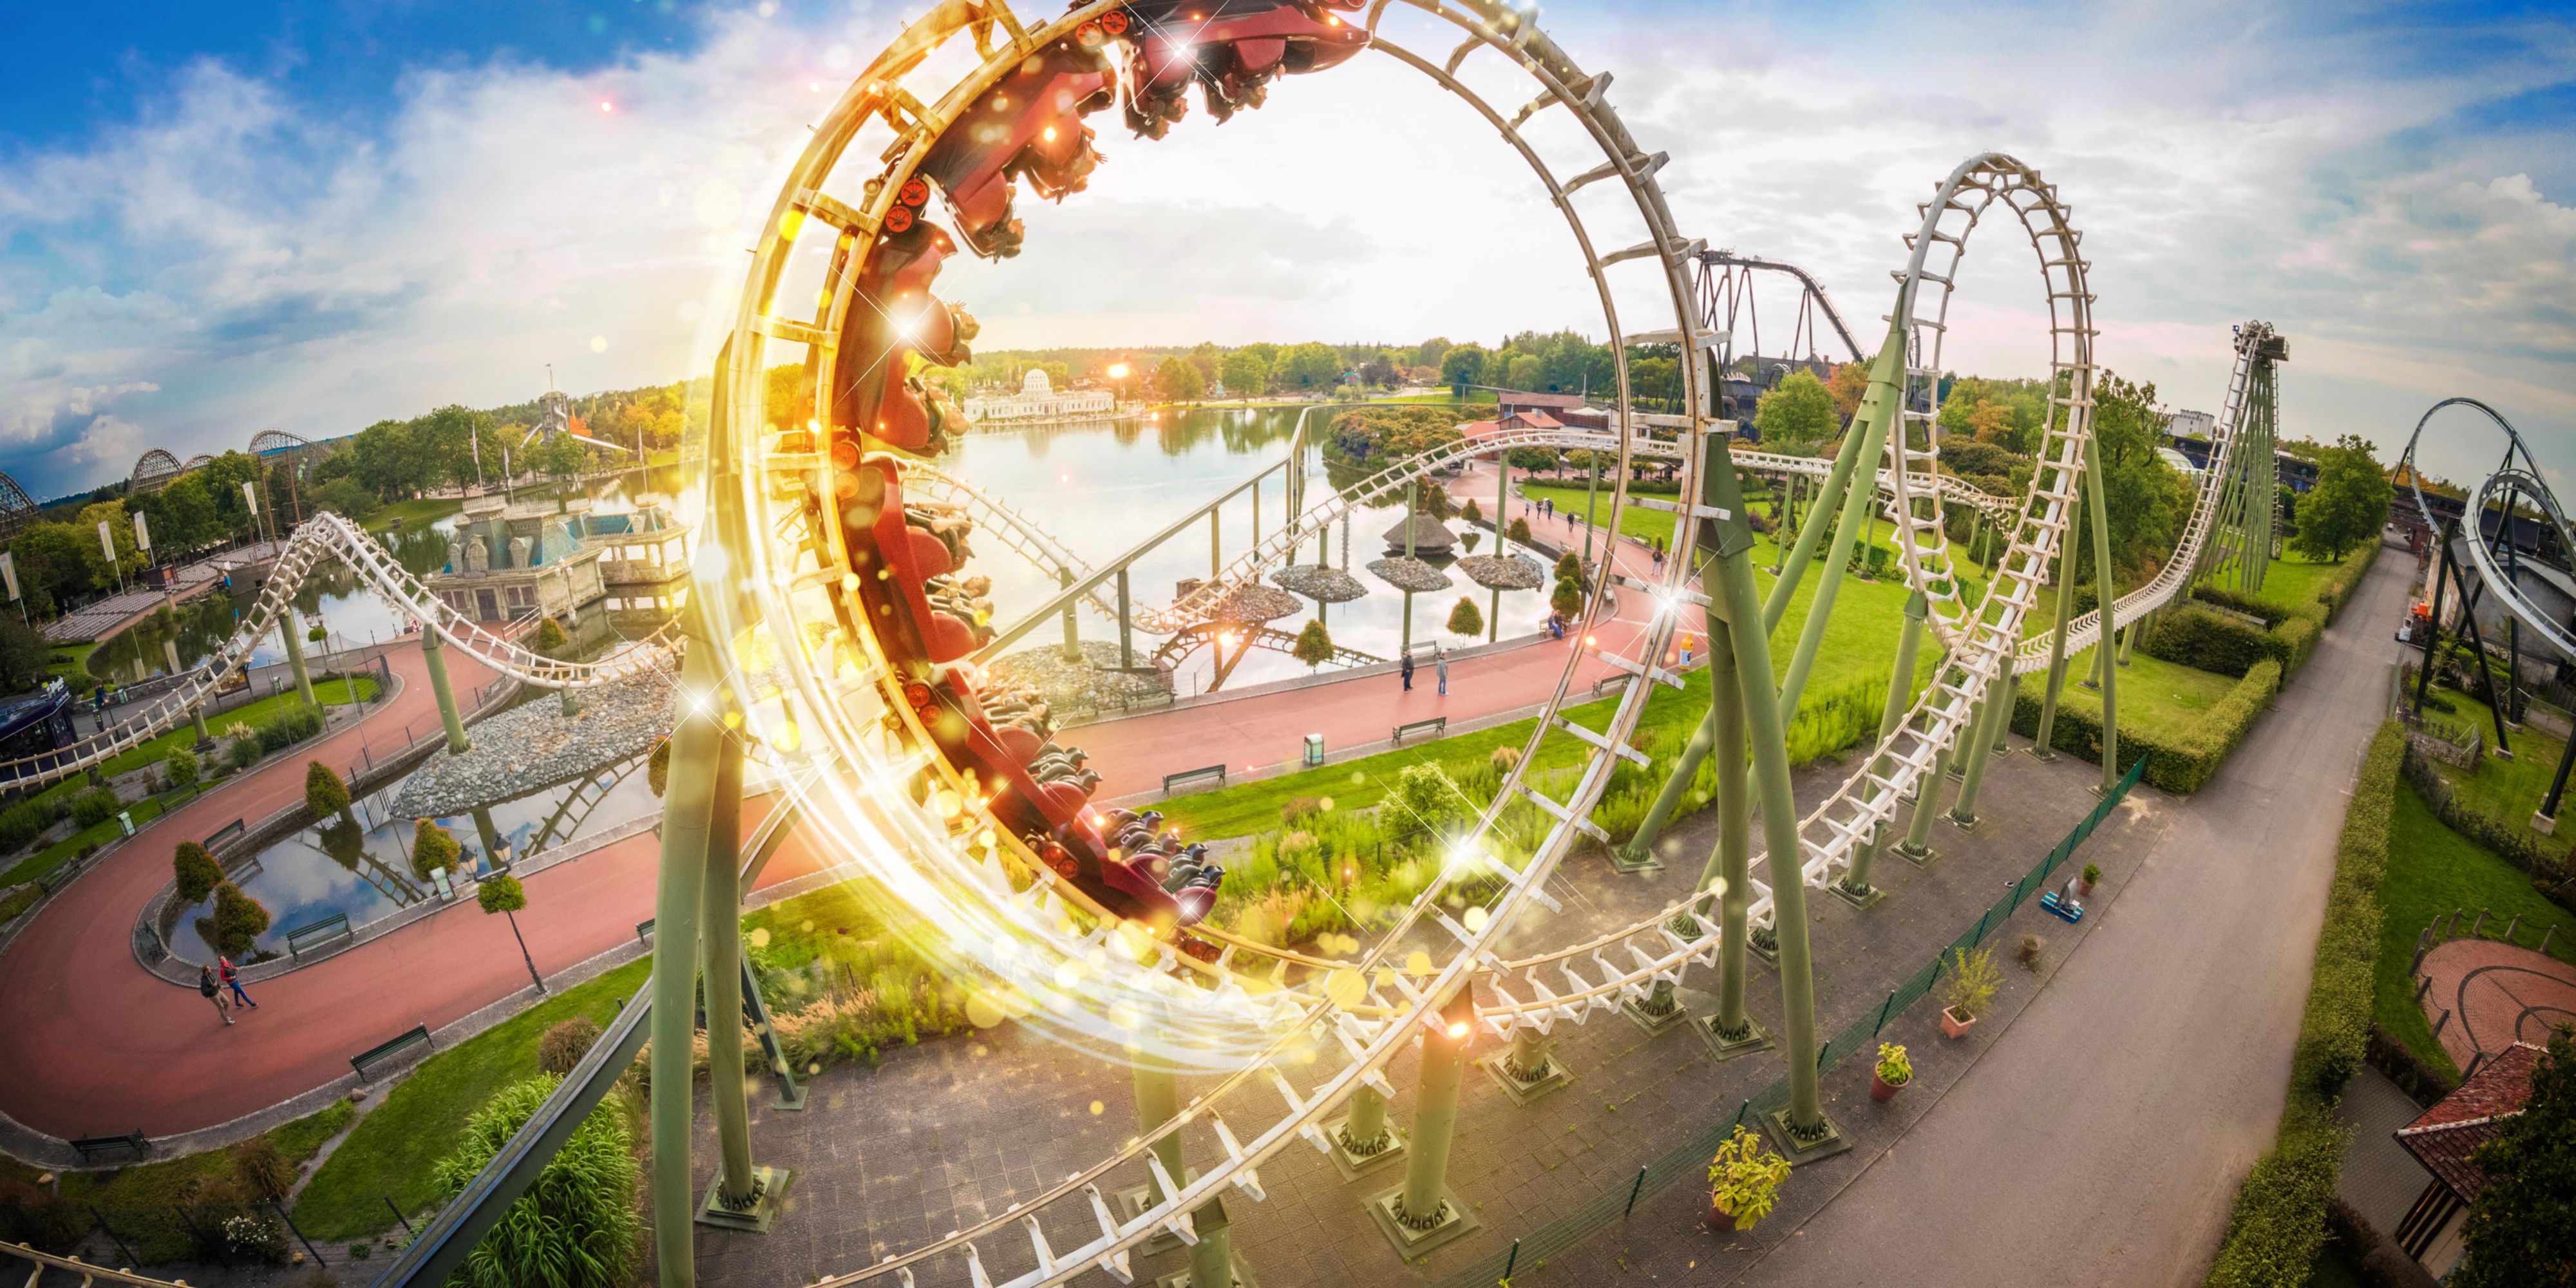 Heide Park Resort is only 20 min by Car away! Enjoy a wonderful day with your family!